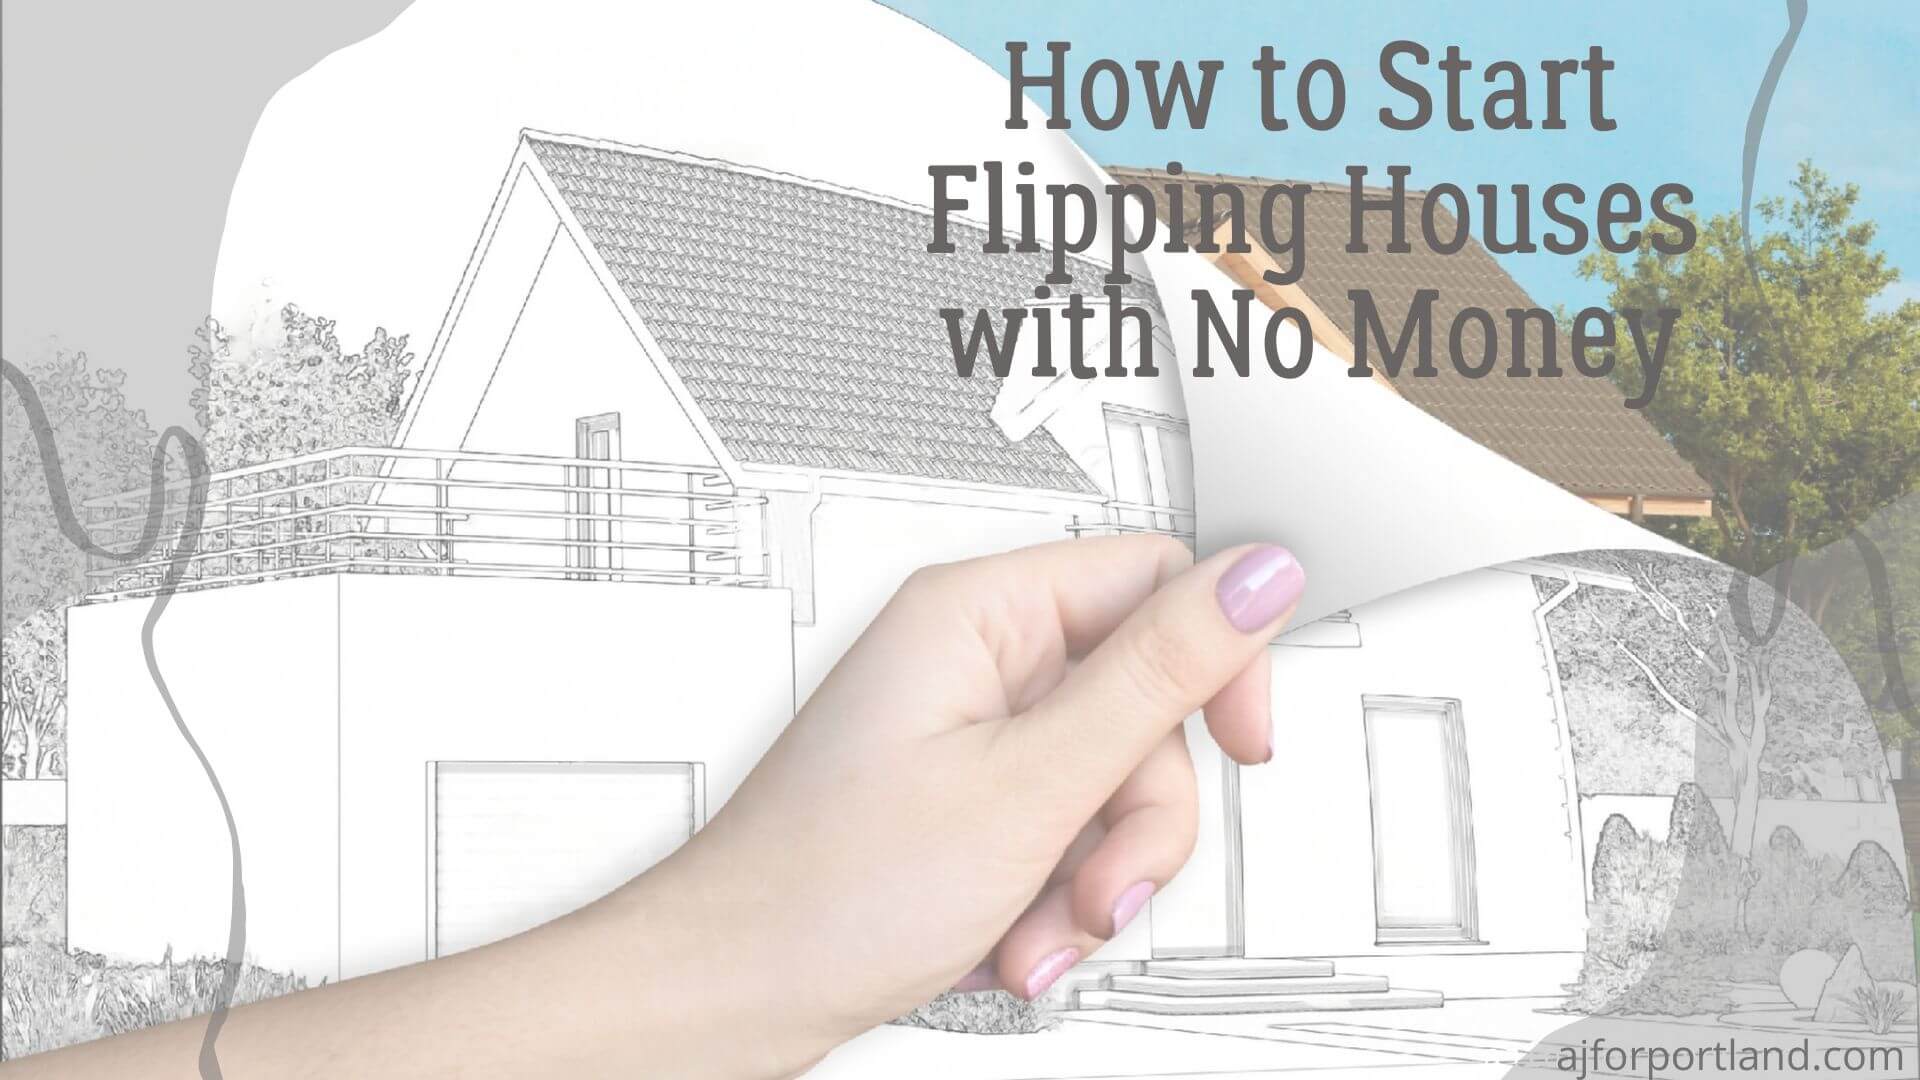 How to Start Flipping Houses with No Money